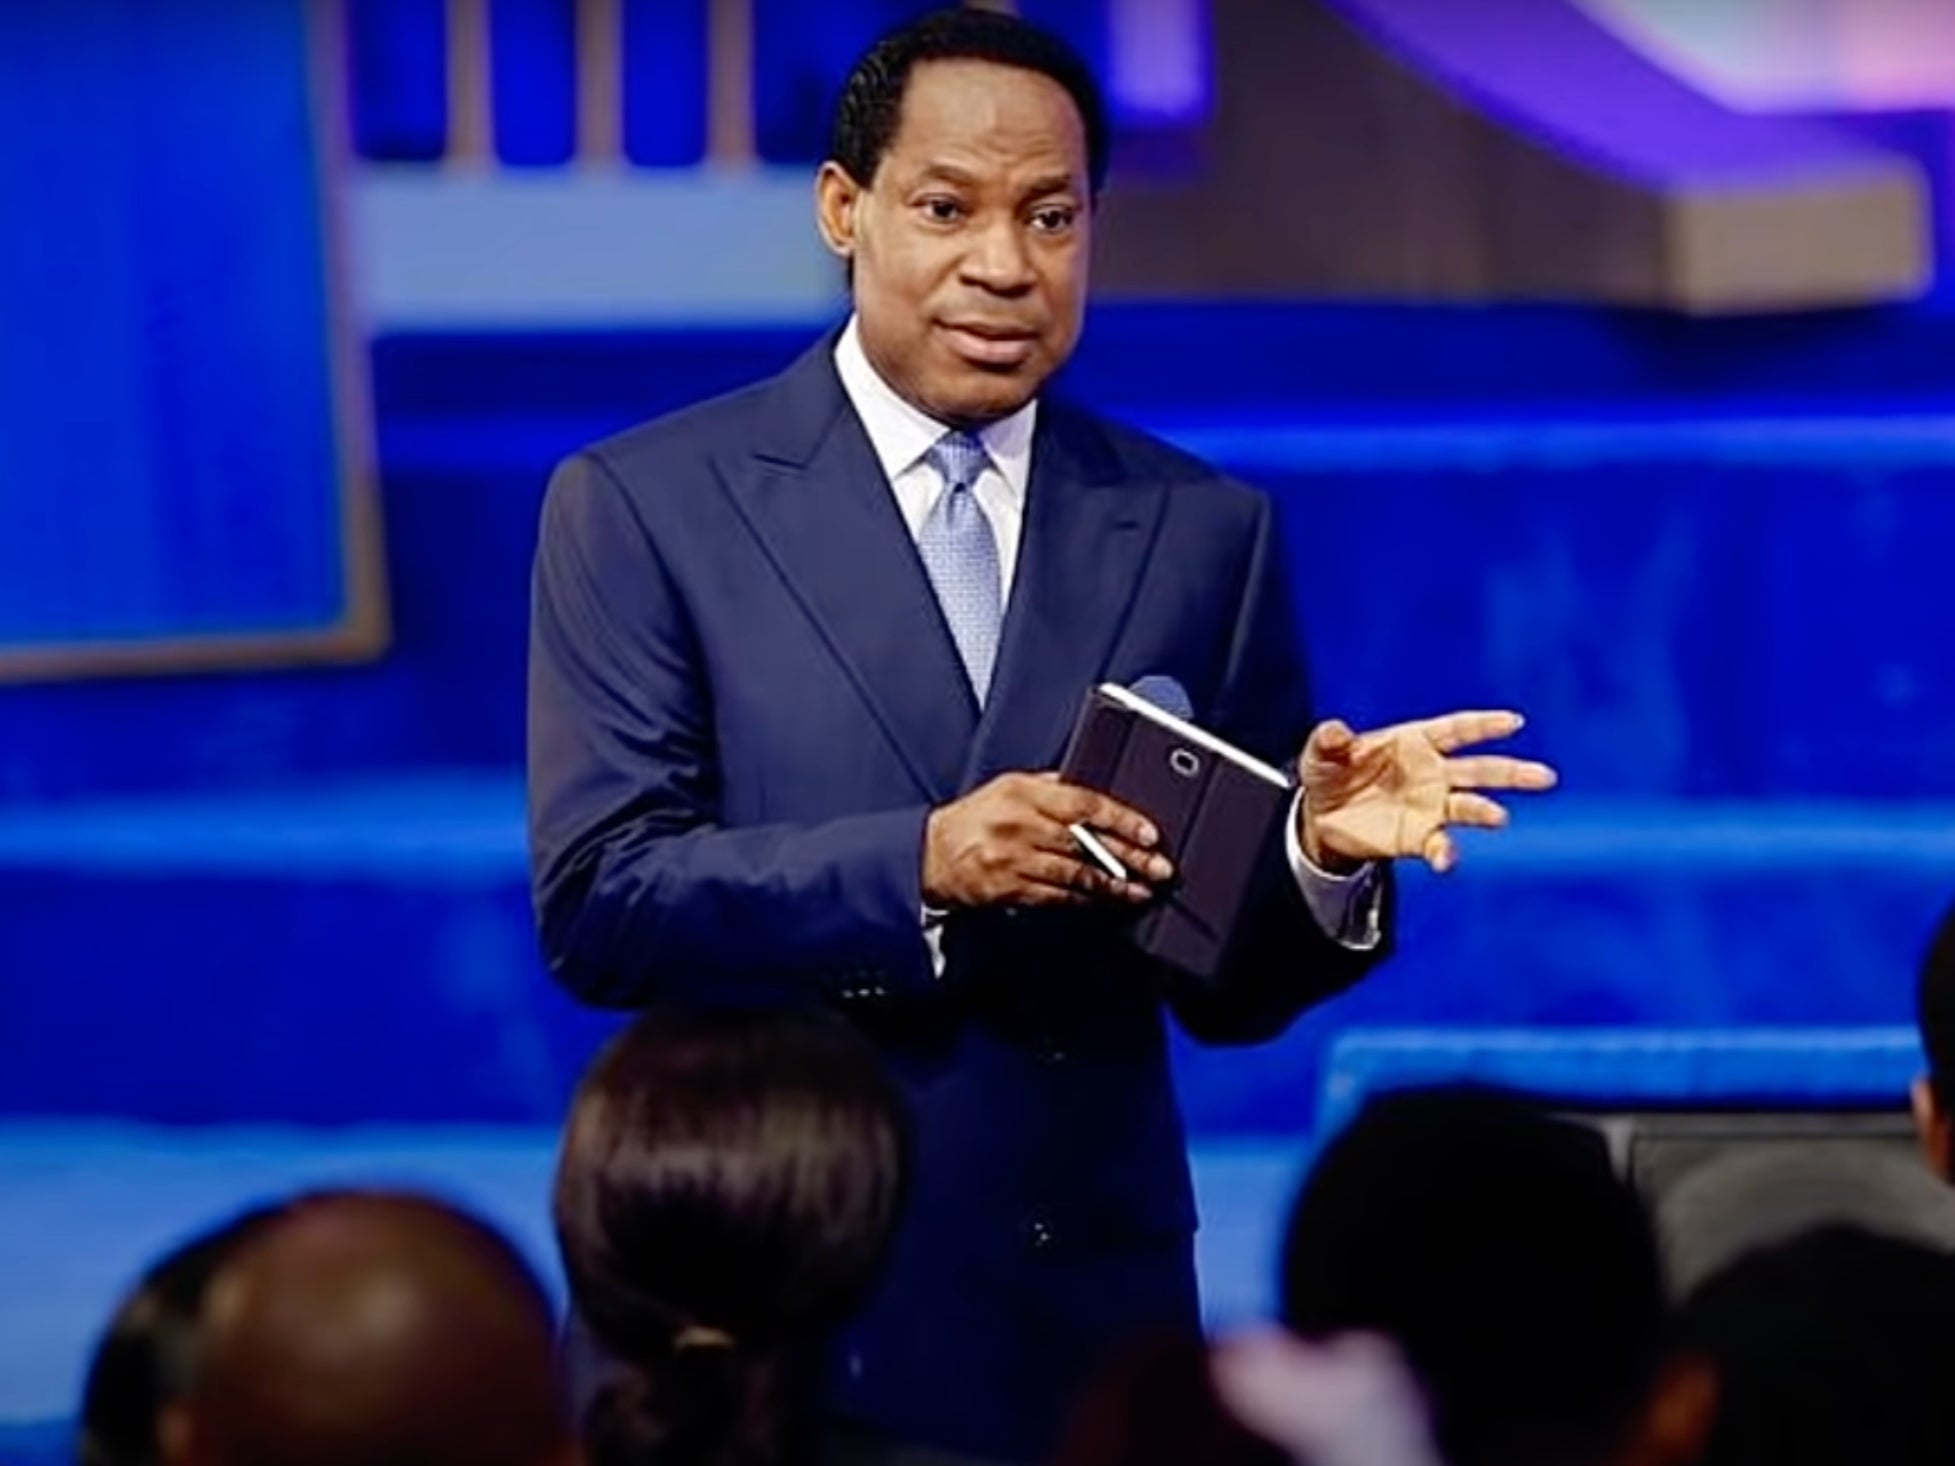 The Christ Embassy, an organisation with churches across the globe, is led by pastor Chris Oyakhilome who has previously encouraged his followers not to get vaccinated